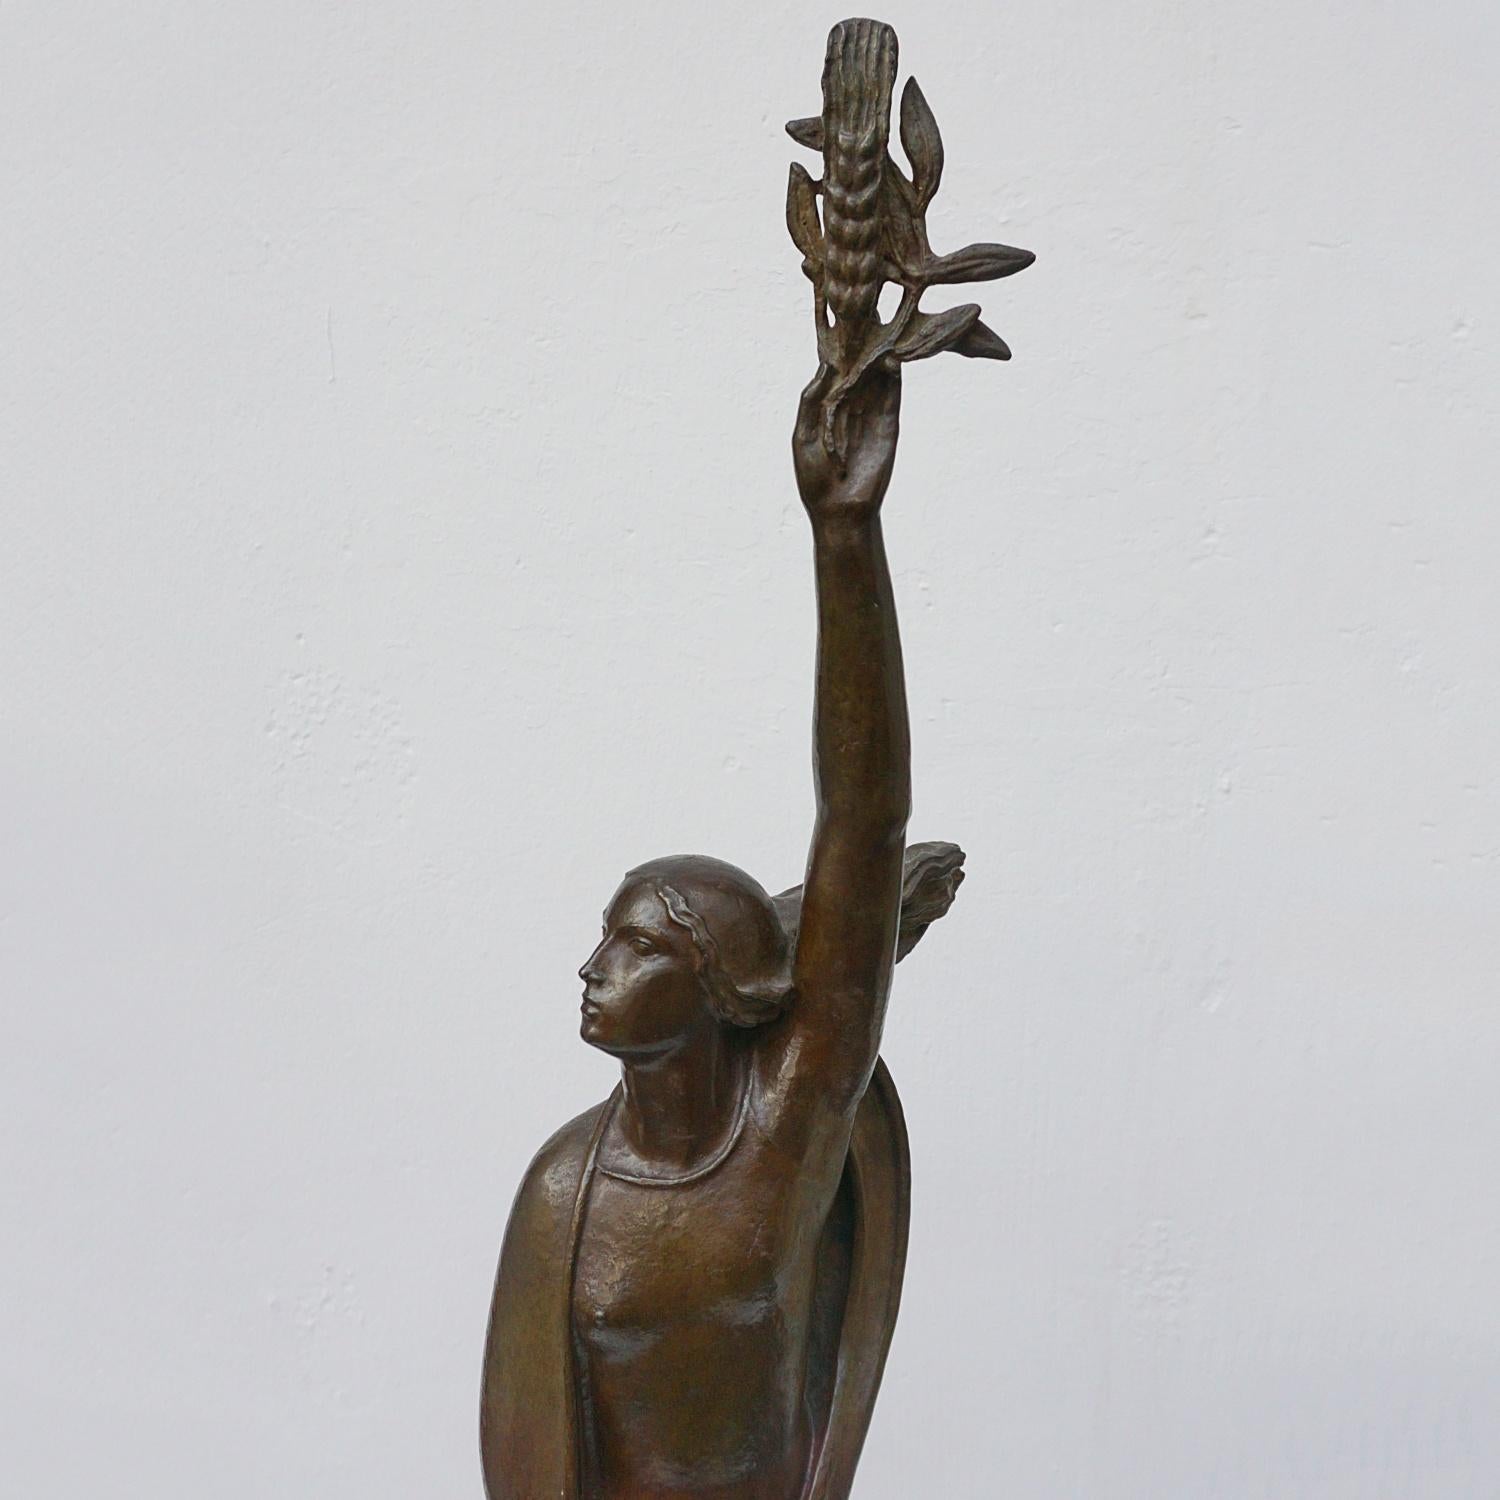 'Ceres' an Art Deco bronze sculpture by André Bizette-Lindet (1906-1988). Depicting Ceres, the Roman goddess of agriculture, fertility and motherly relationships, holding aloft a strand of Wheat, bear breasted with a shawl around her and her hair